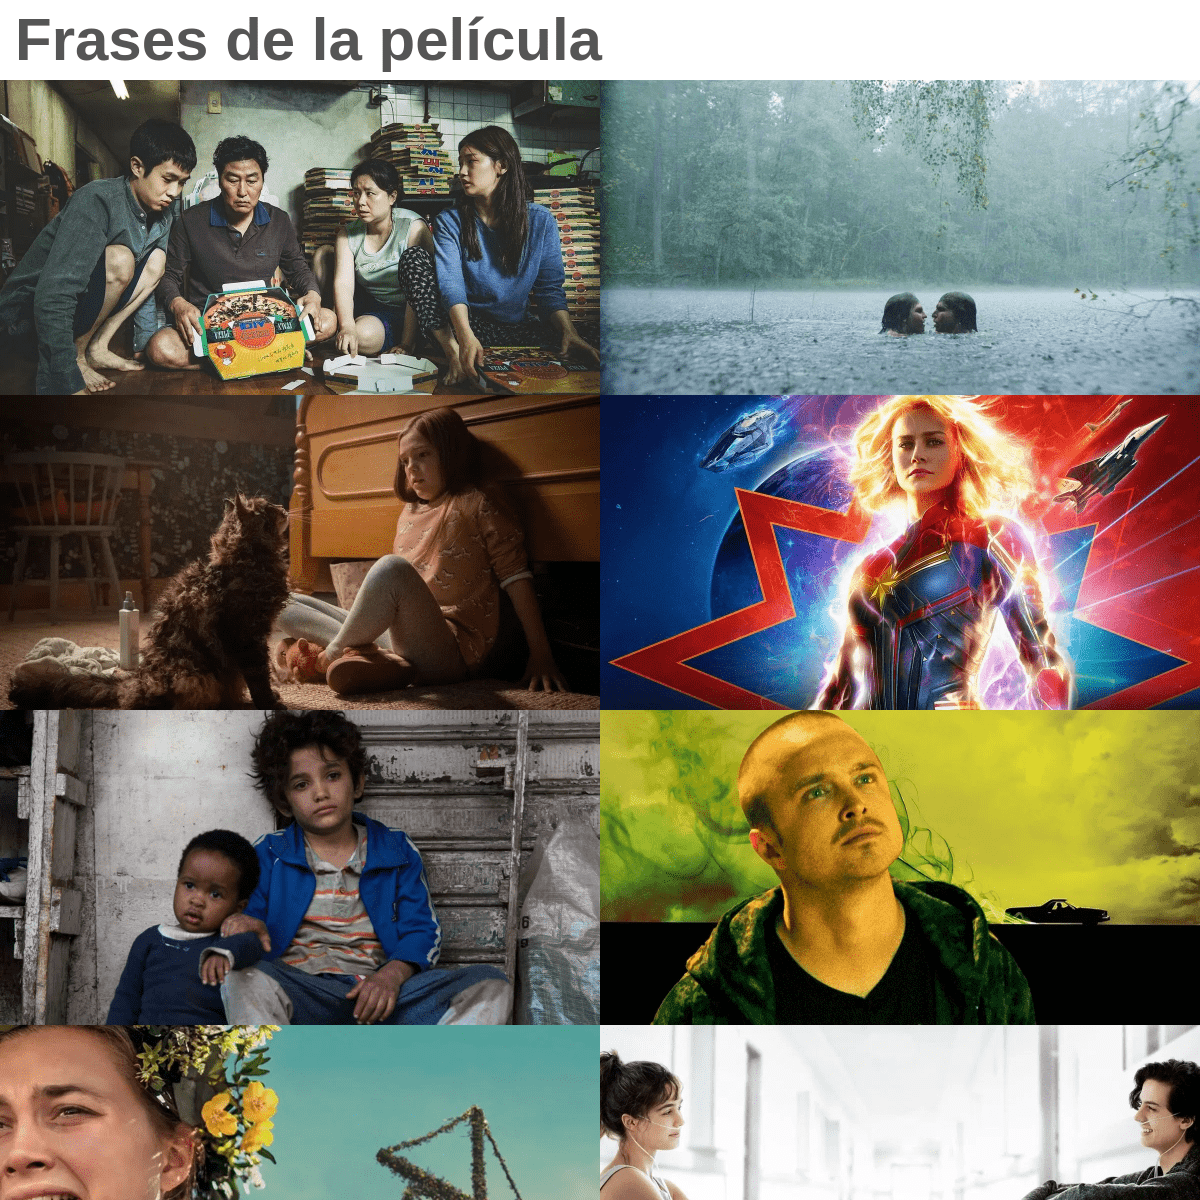 A complete backup of frasesdelapelicula.com